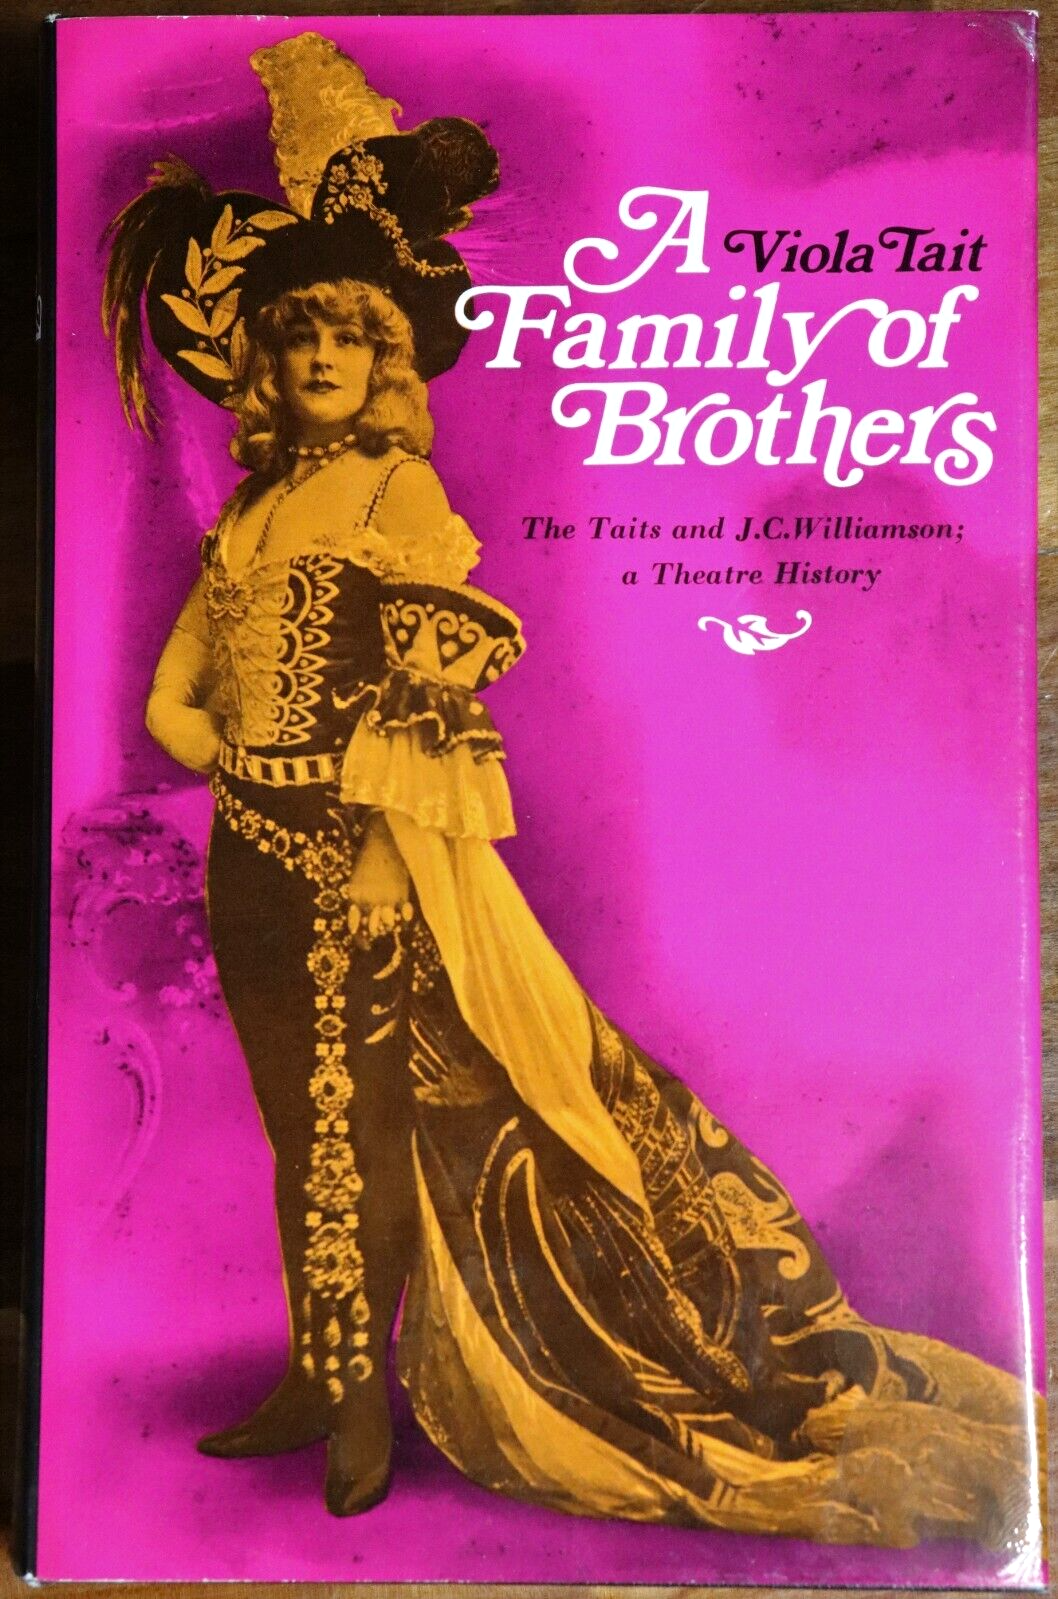 A Family Of Brothers by Viola Tait - 1971 - 1st Edition Australian Theatre Book